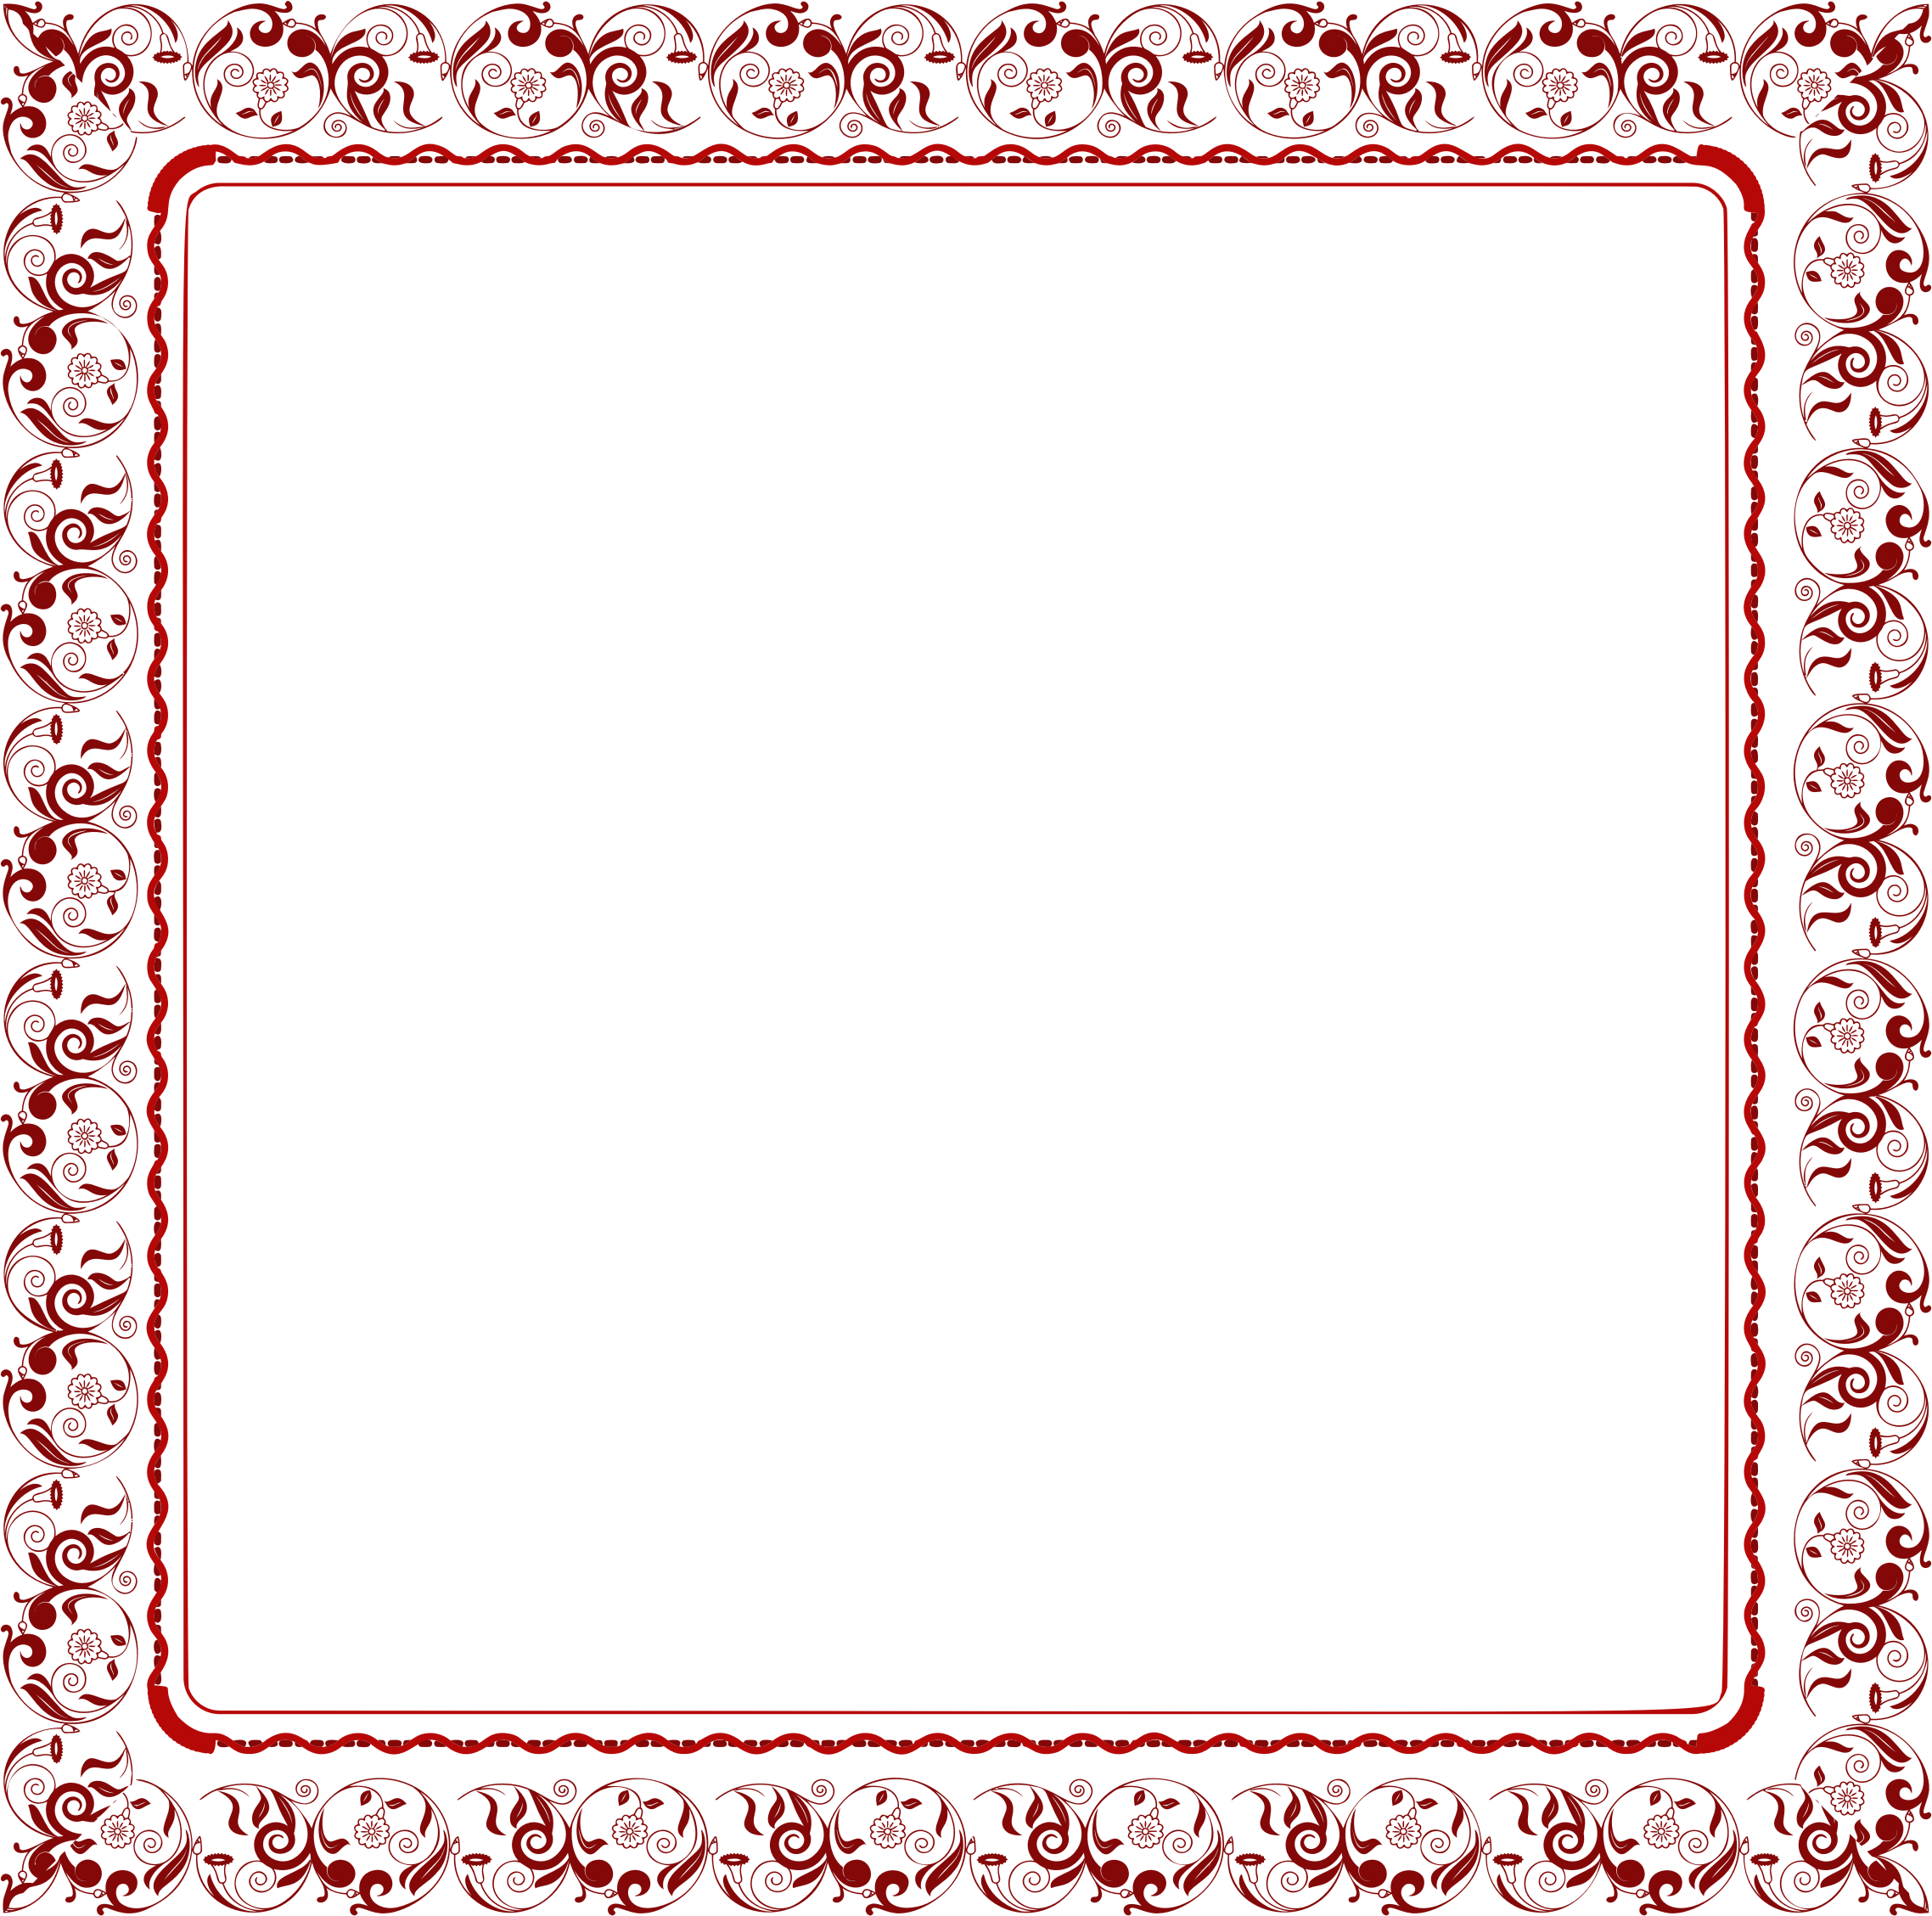 Download PNG image - Abstract Frame PNG Image 